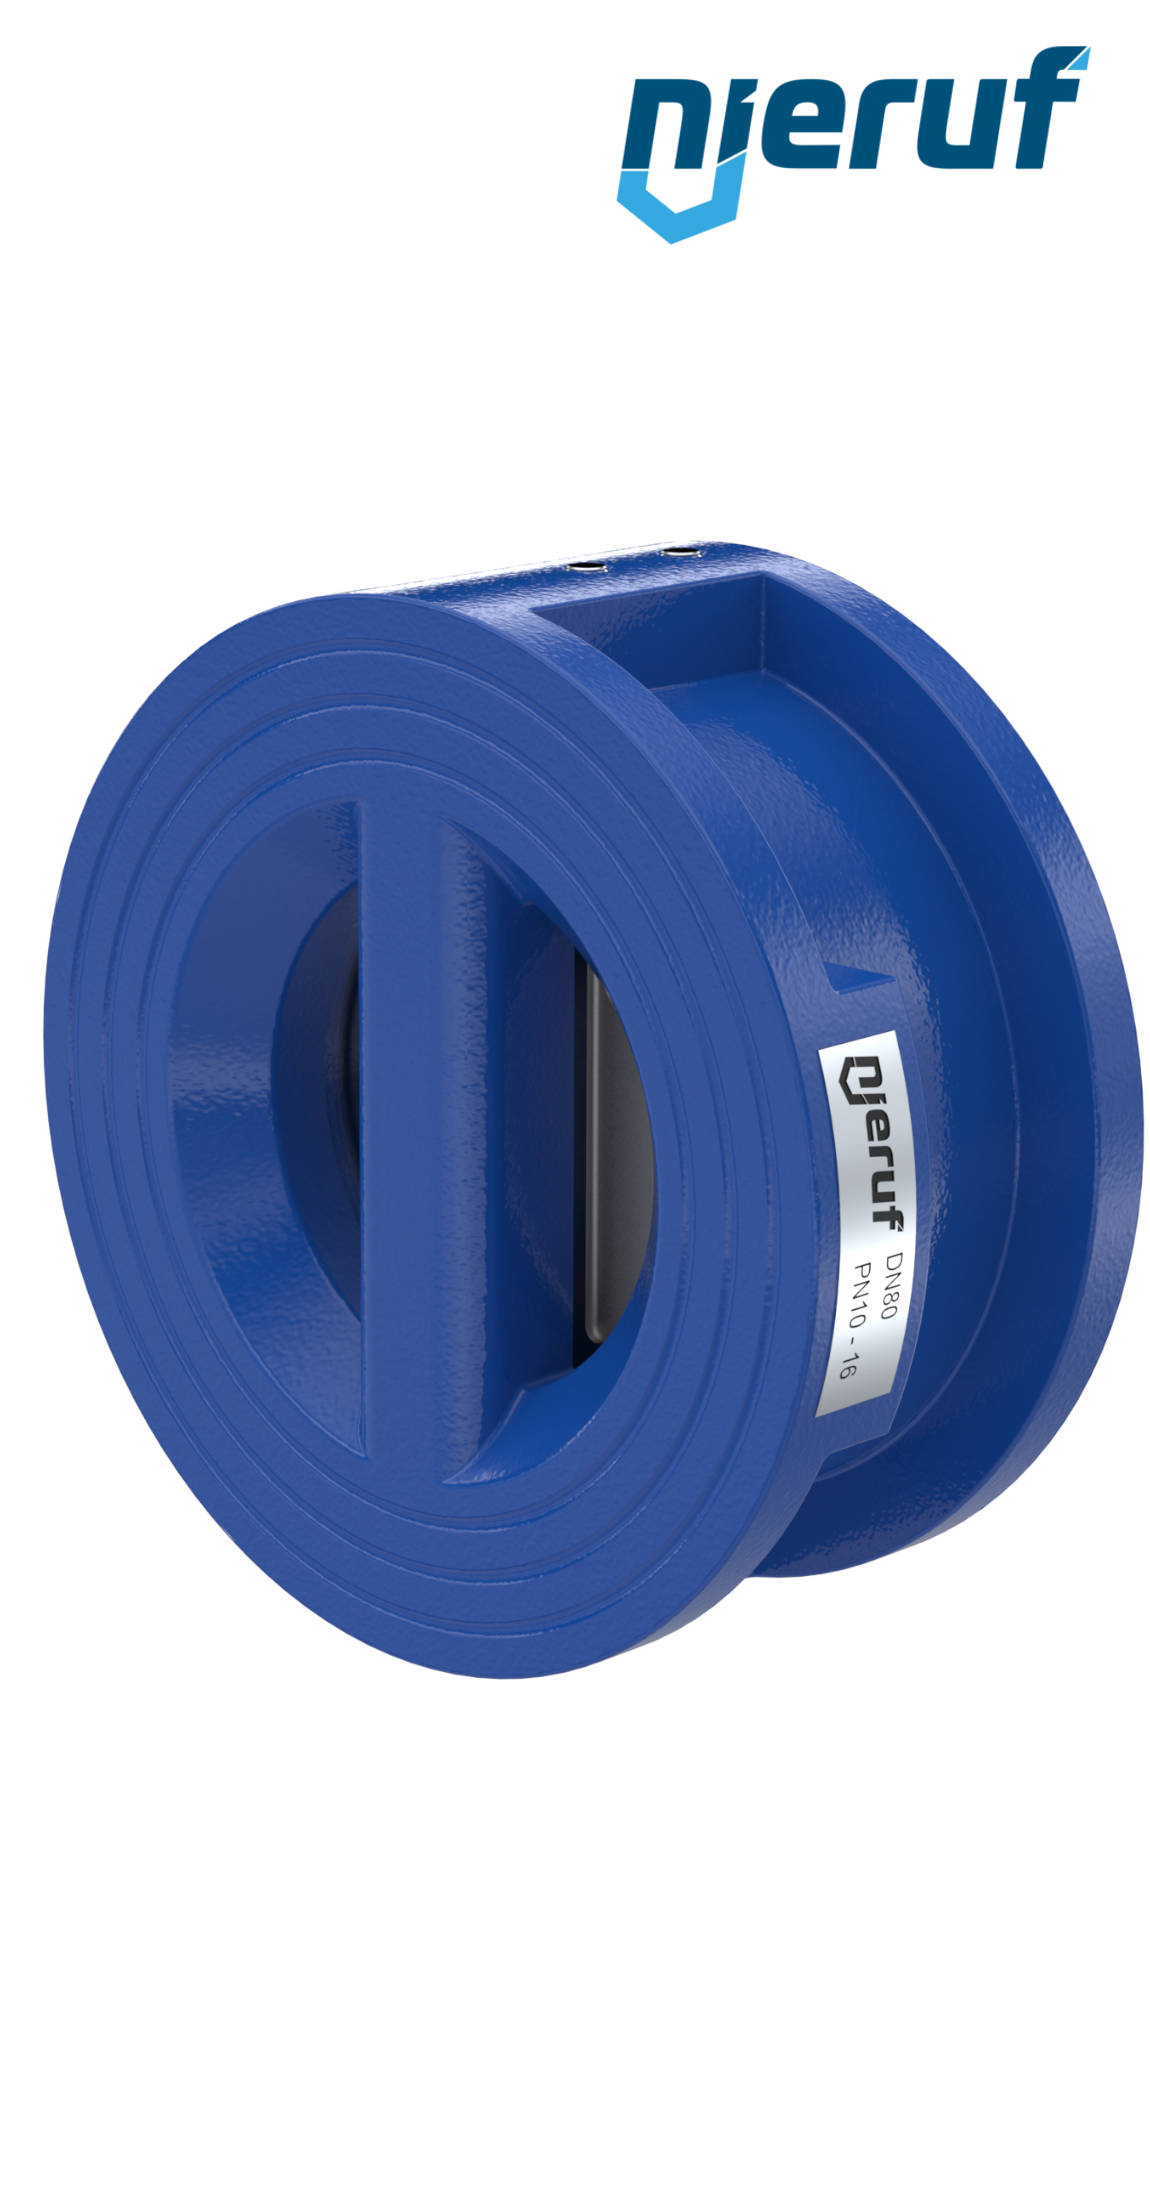 dual plate check valve DN80 DR02 GGG40 epoxyd plated blue 180µm EPDM